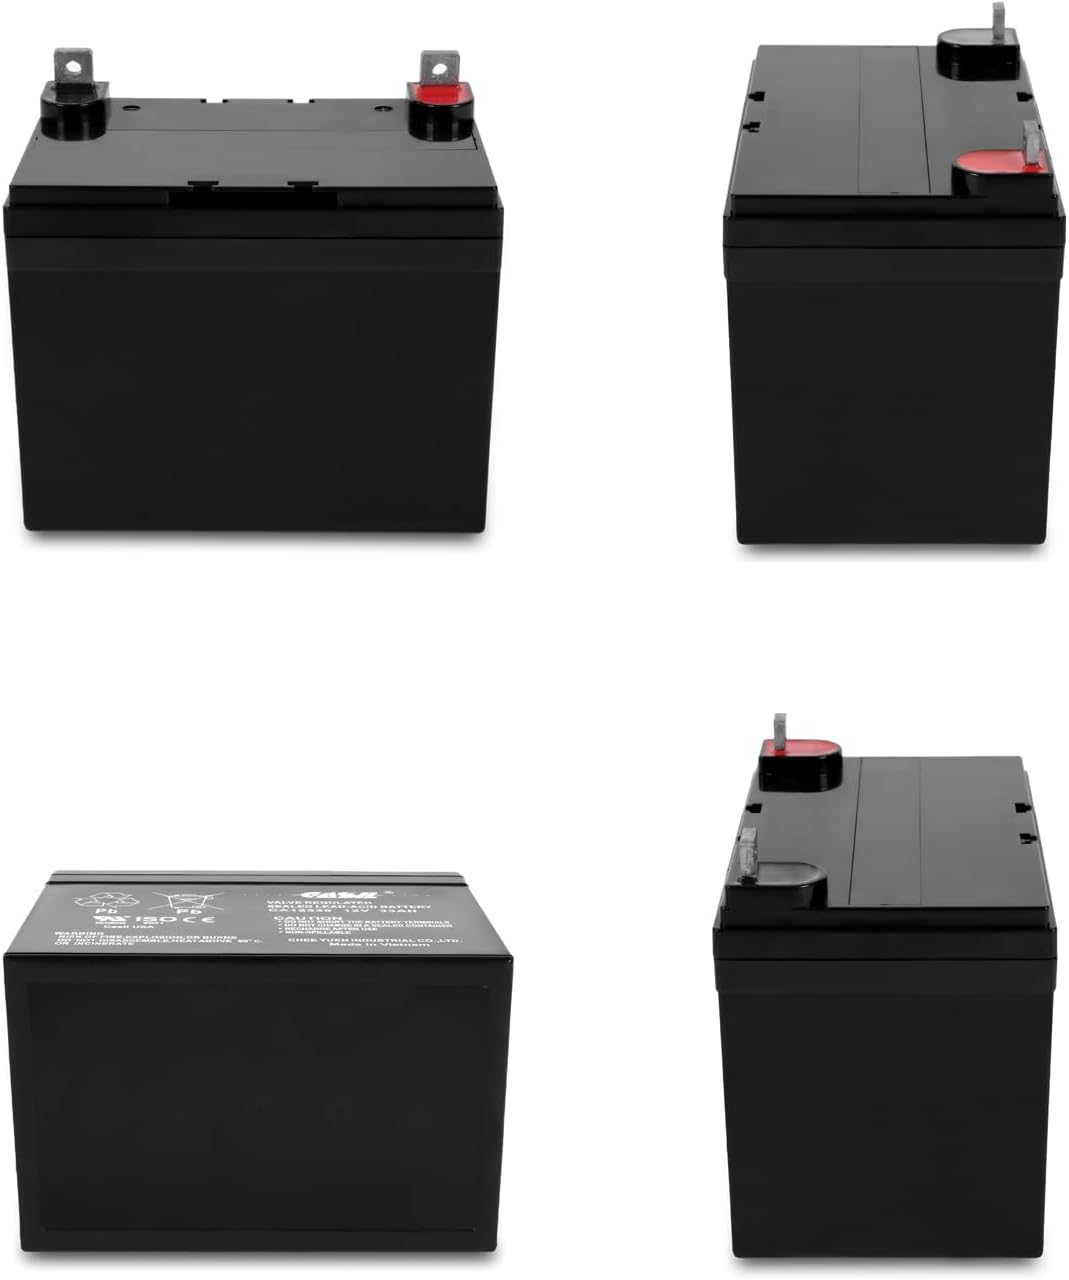 Battery - Casil 12V 33Ah Replacement Battery Compatible with Hoveround MPV1 MPV2 MPV3 MPV4 MPV5 Battery Jazzy 1103 45976 UB UPS12-150MR LC-LA1233P EP33-12 PR UPS12-150MR LC-LA1233P EP33-12 PRC1235 2 Pack